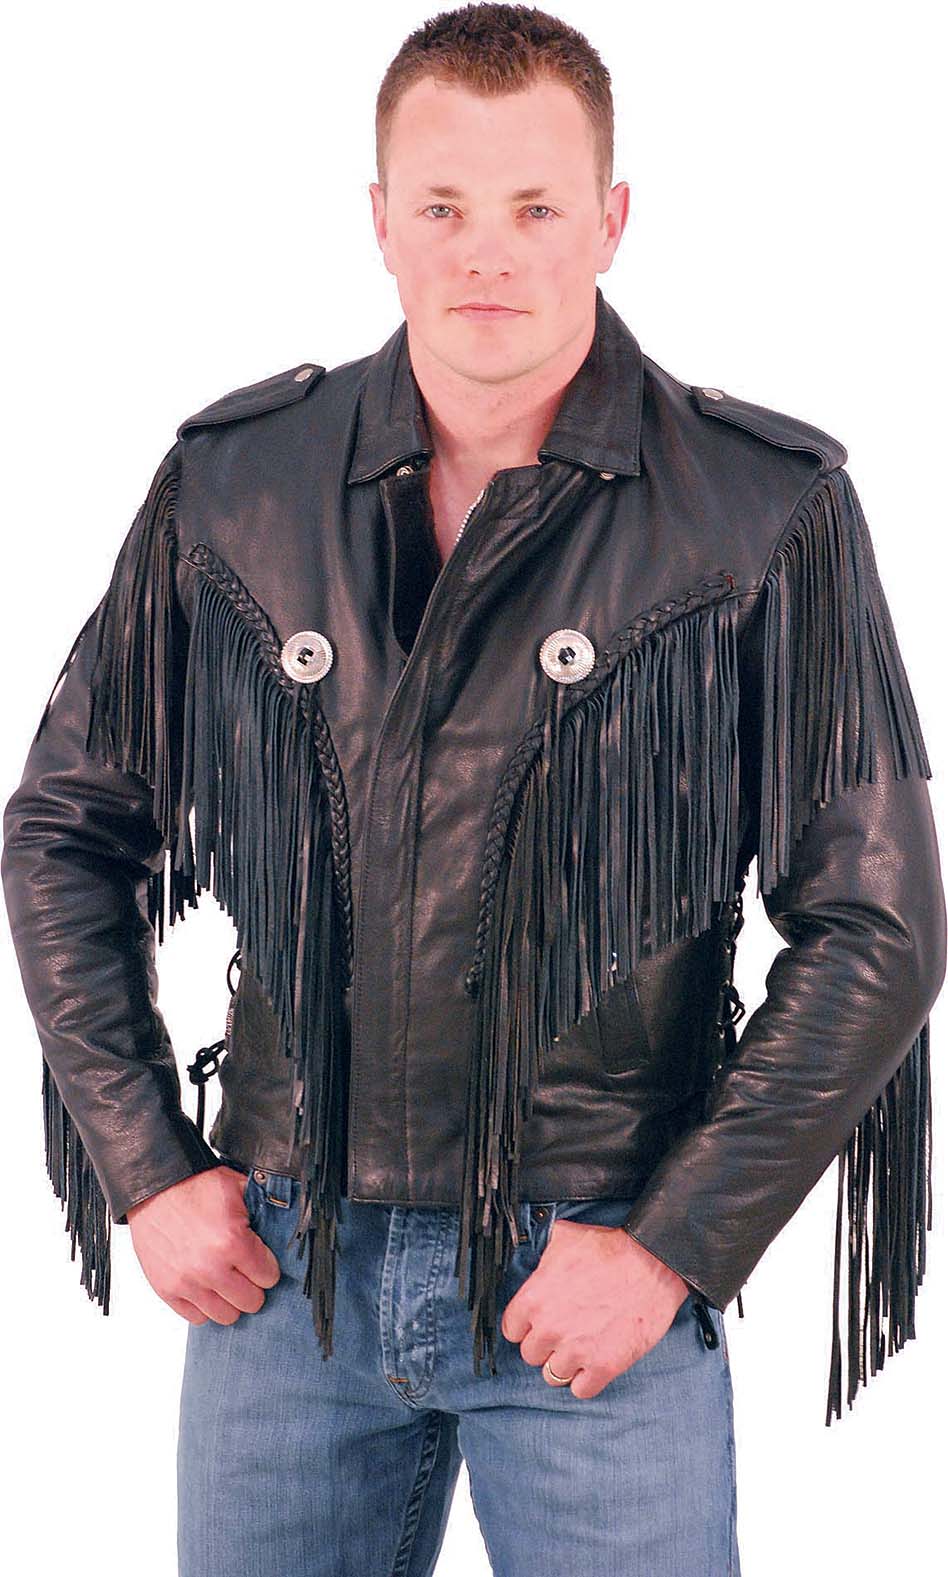 Men's fringe leather jacket with a bit of a western flair.